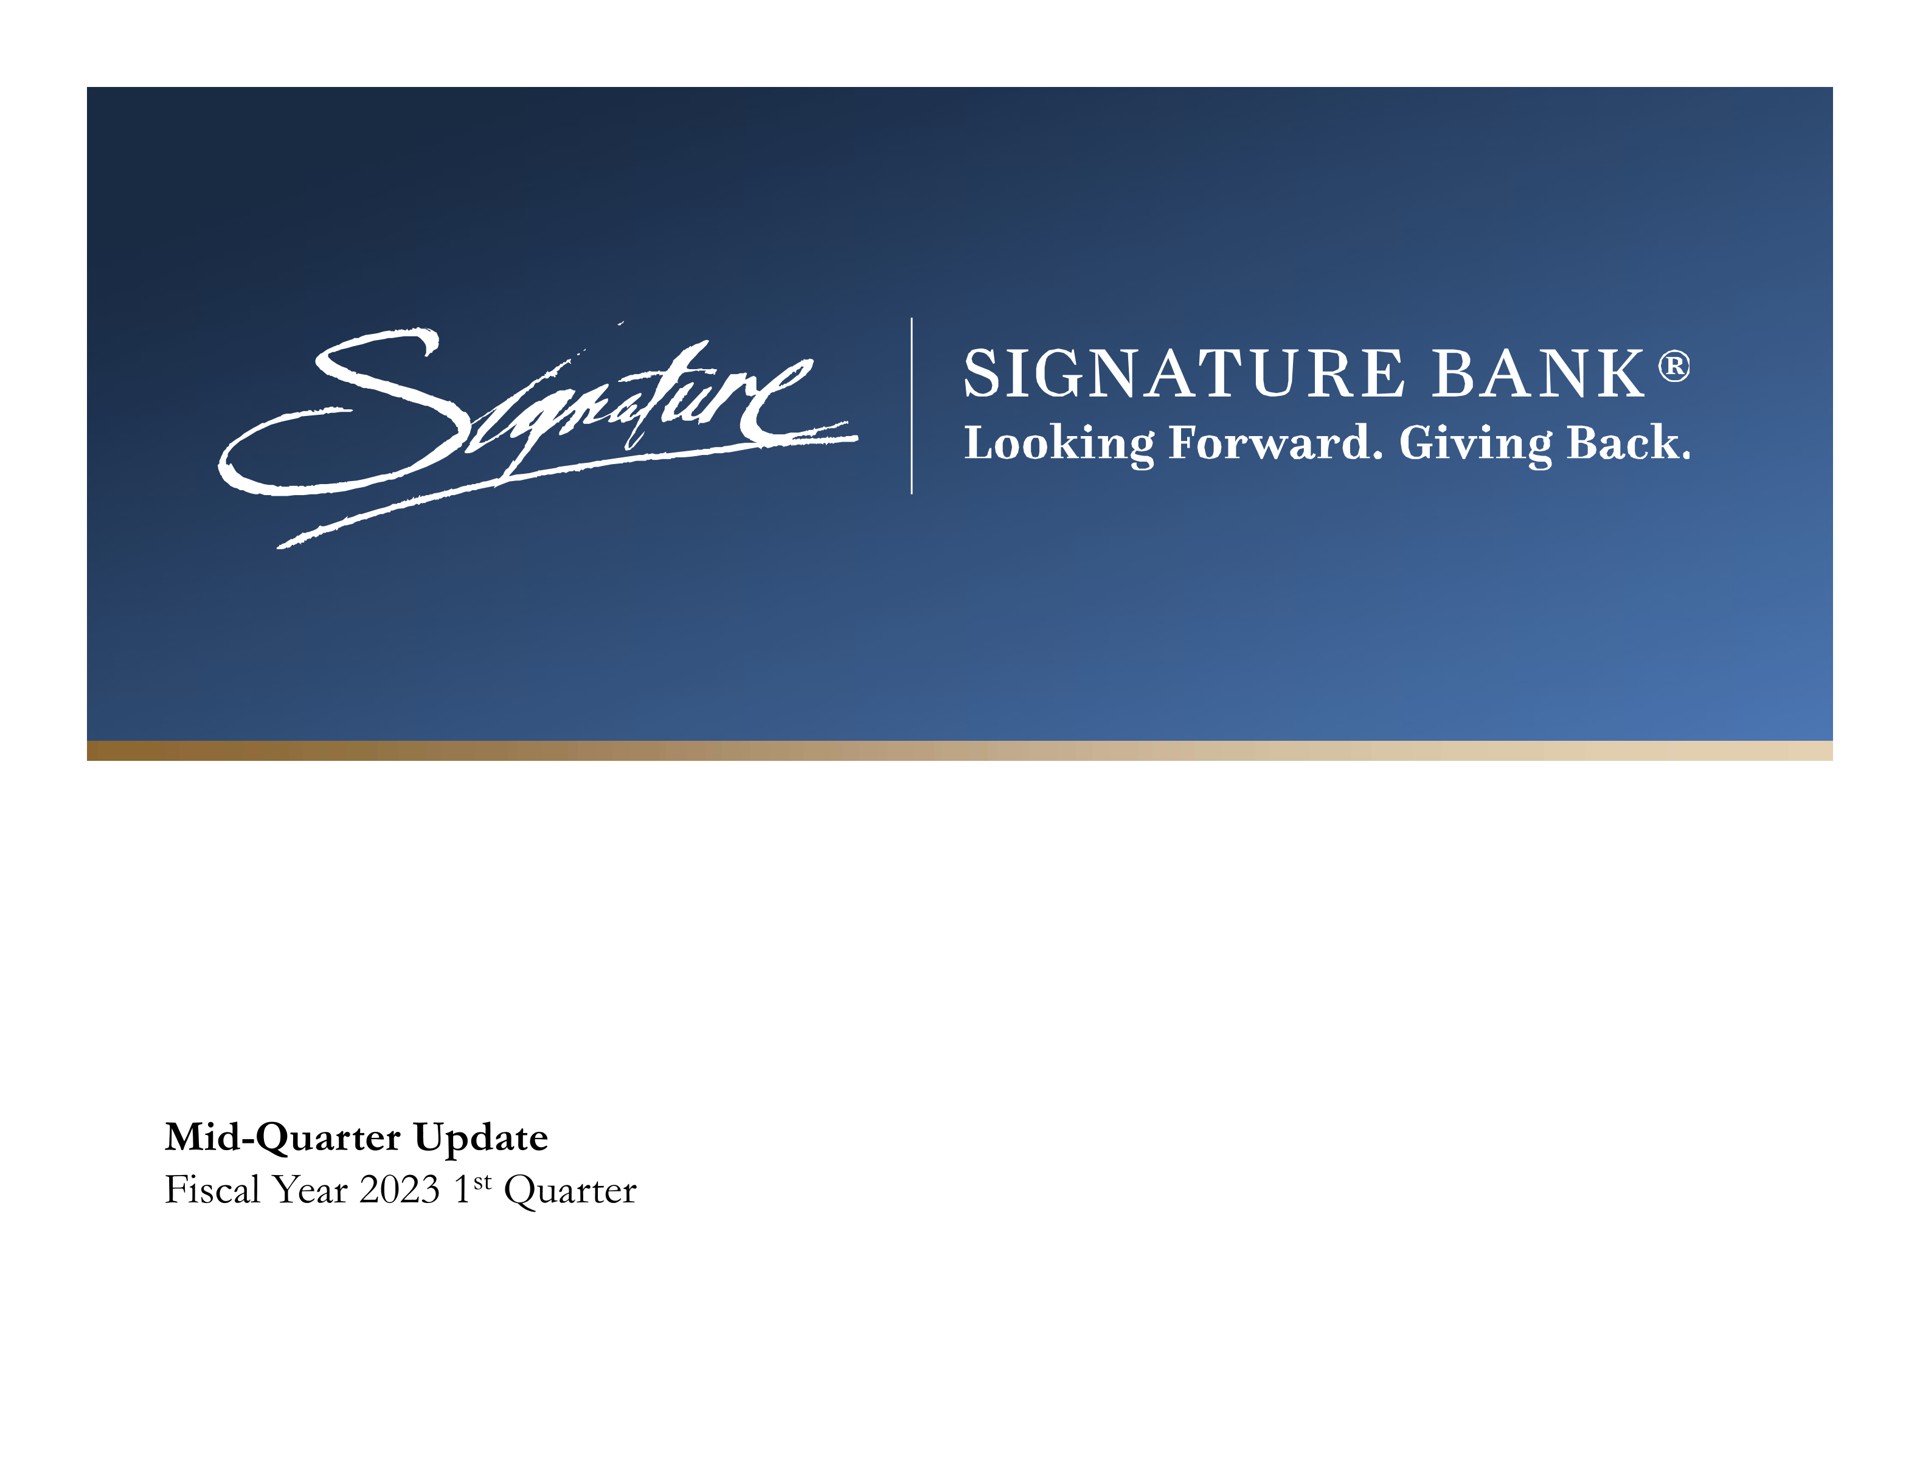 mid quarter update fiscal year quarter signature bank looking forward giving back | Signature Bank